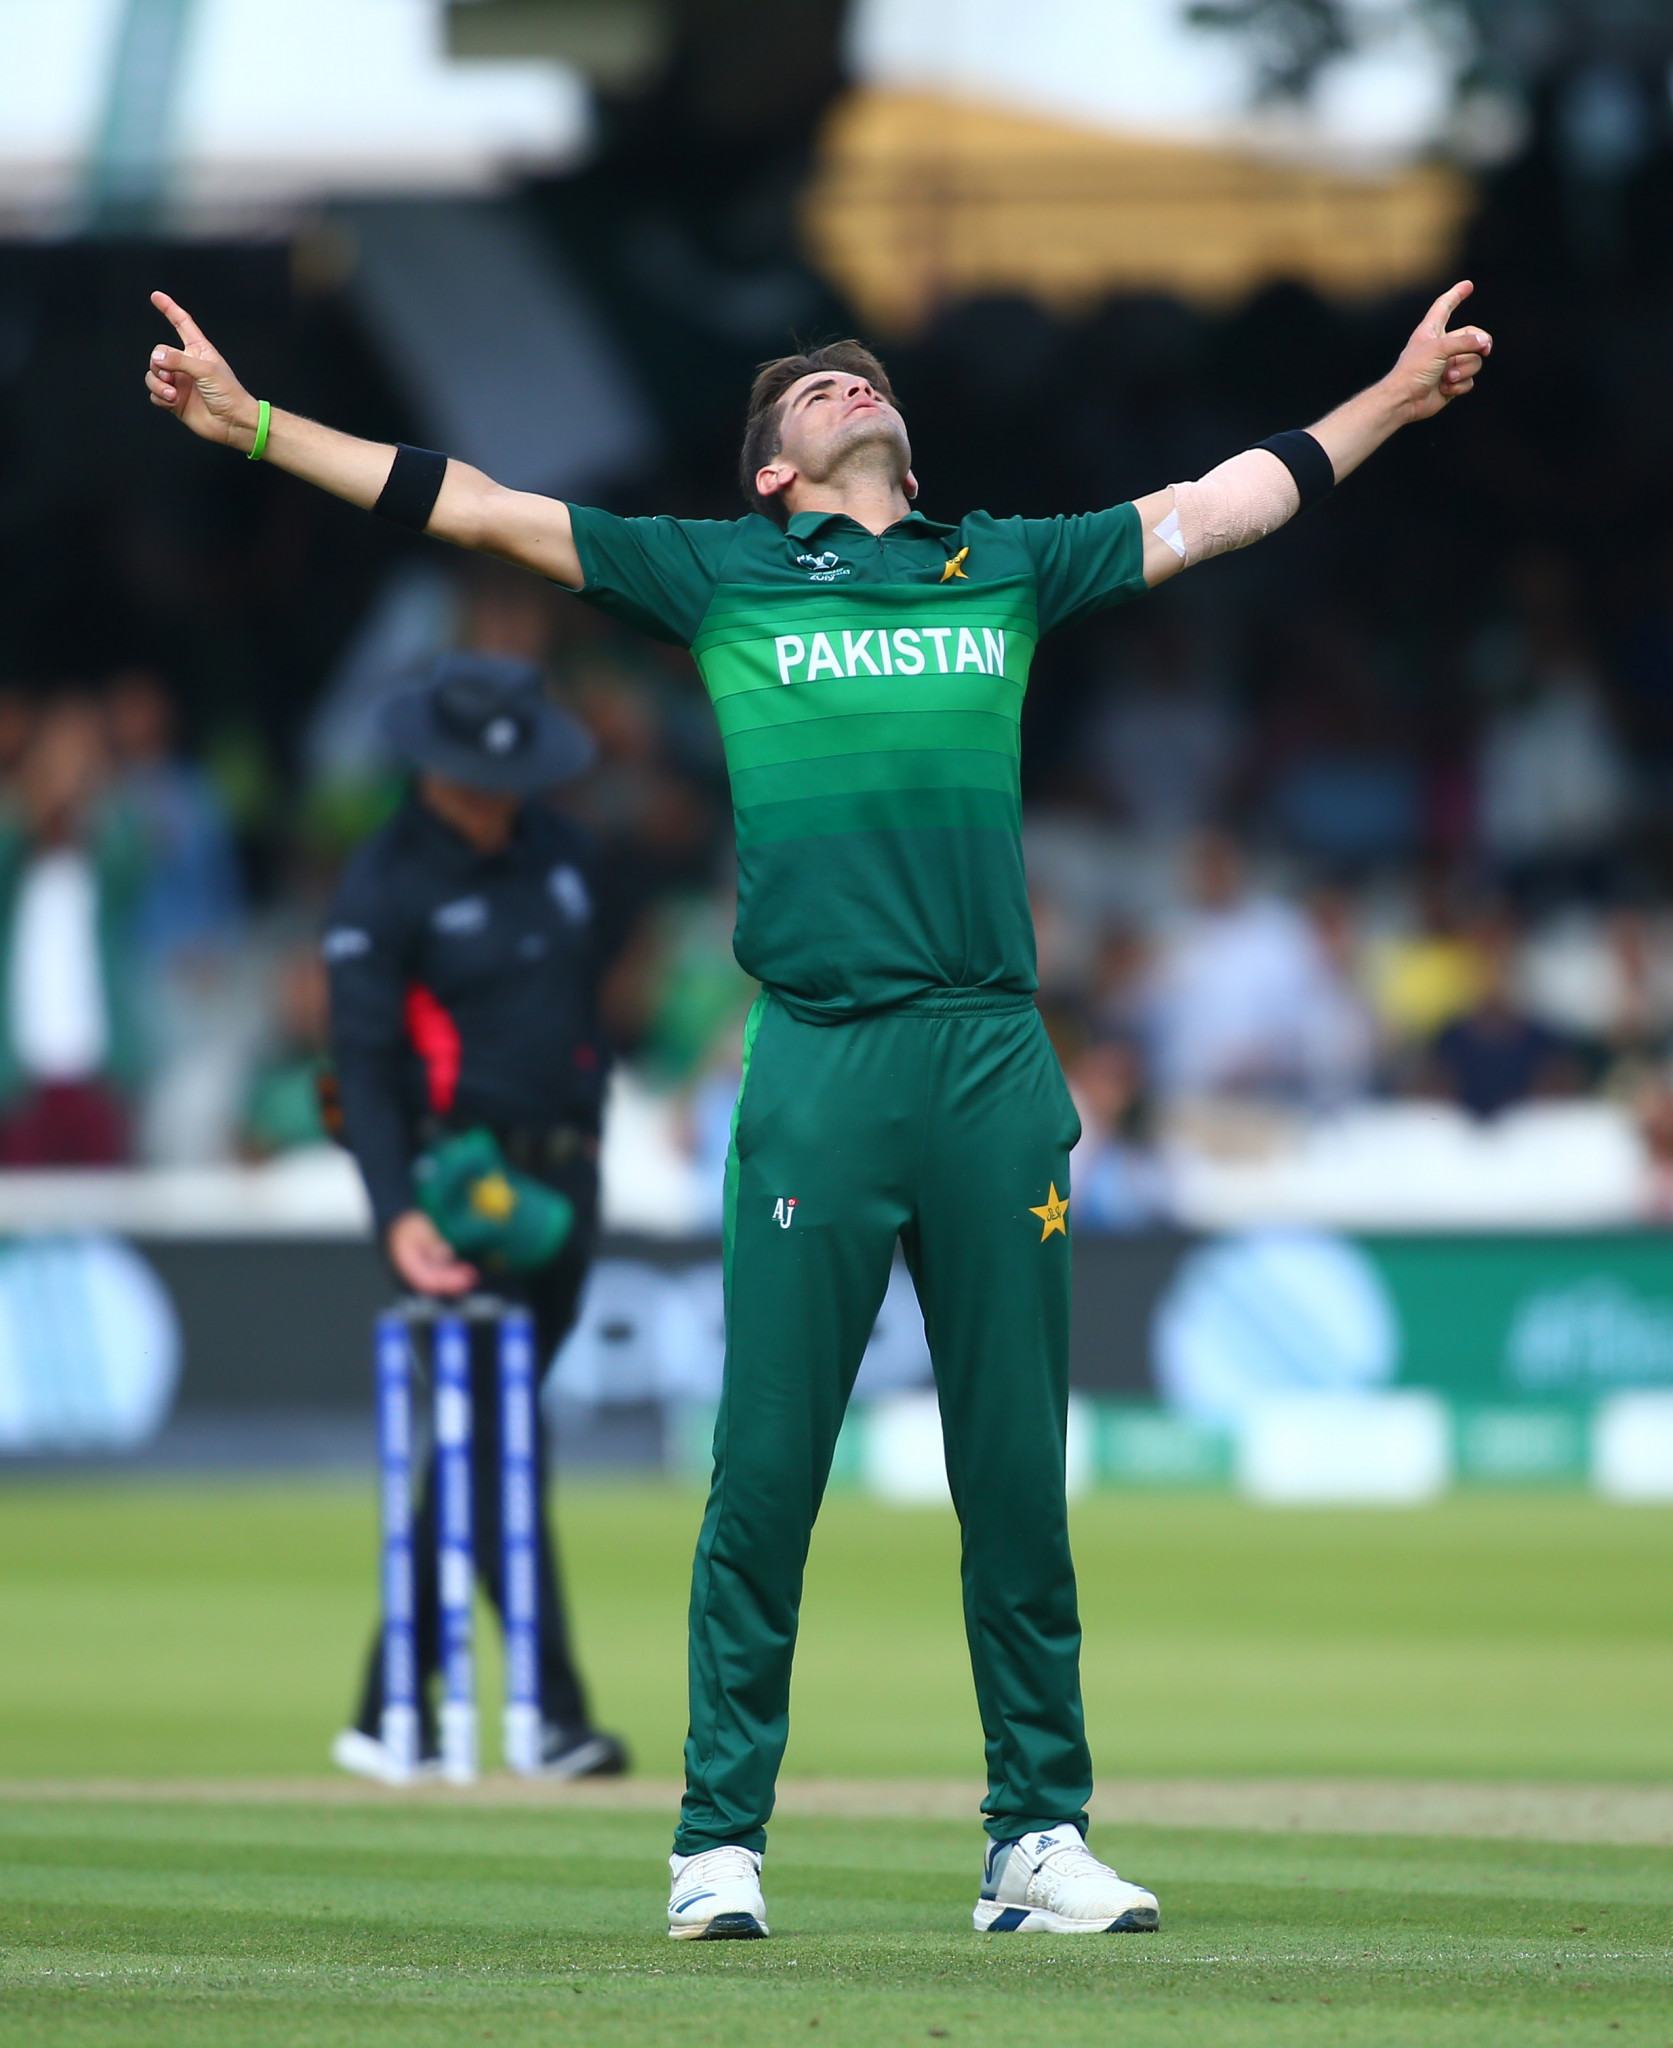 Pakistan bow out of ICC Cricket World Cup on a high as teenager Afridi stars